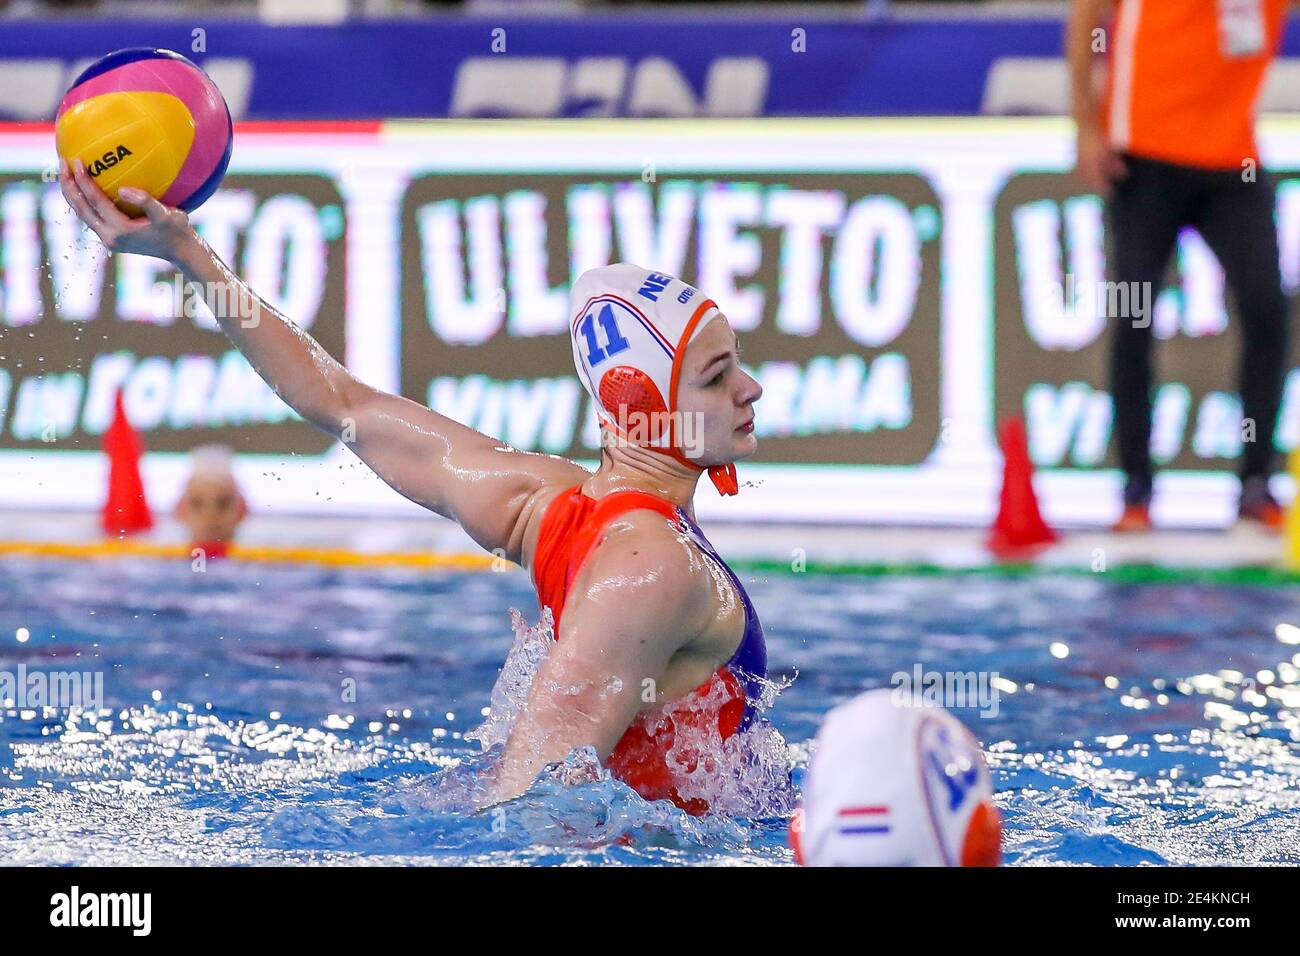 TRIESTE, ITALY - JANUARY 23: Simone van de Kraats of Netherlands during the  match between Netherlands and Greece at Women's Water Polo Olympic Games Q  Stock Photo - Alamy